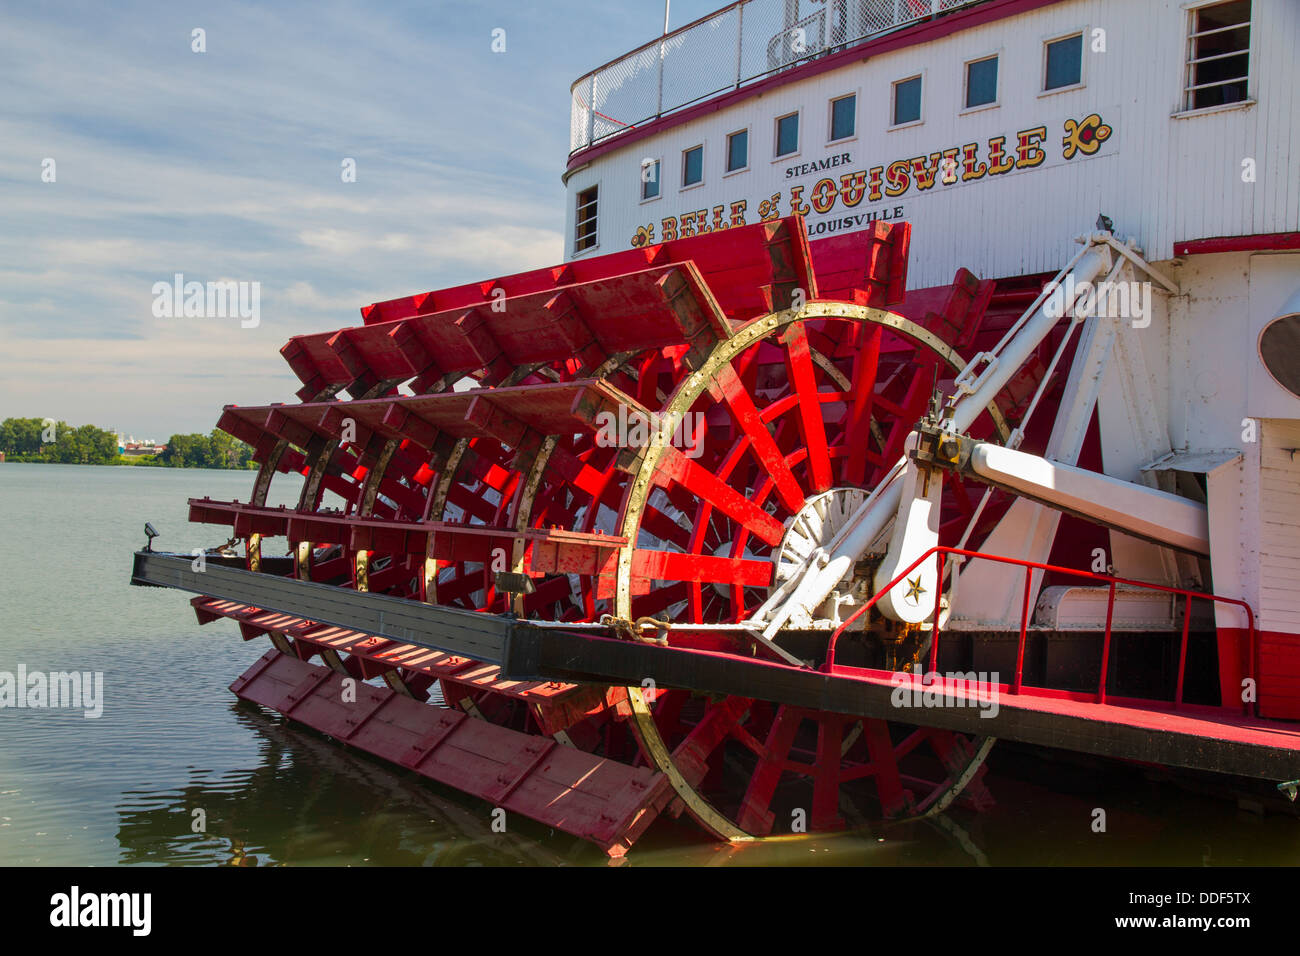 River paddle steamer on the Ohio river at Louisville, KY, USA Stock Photo